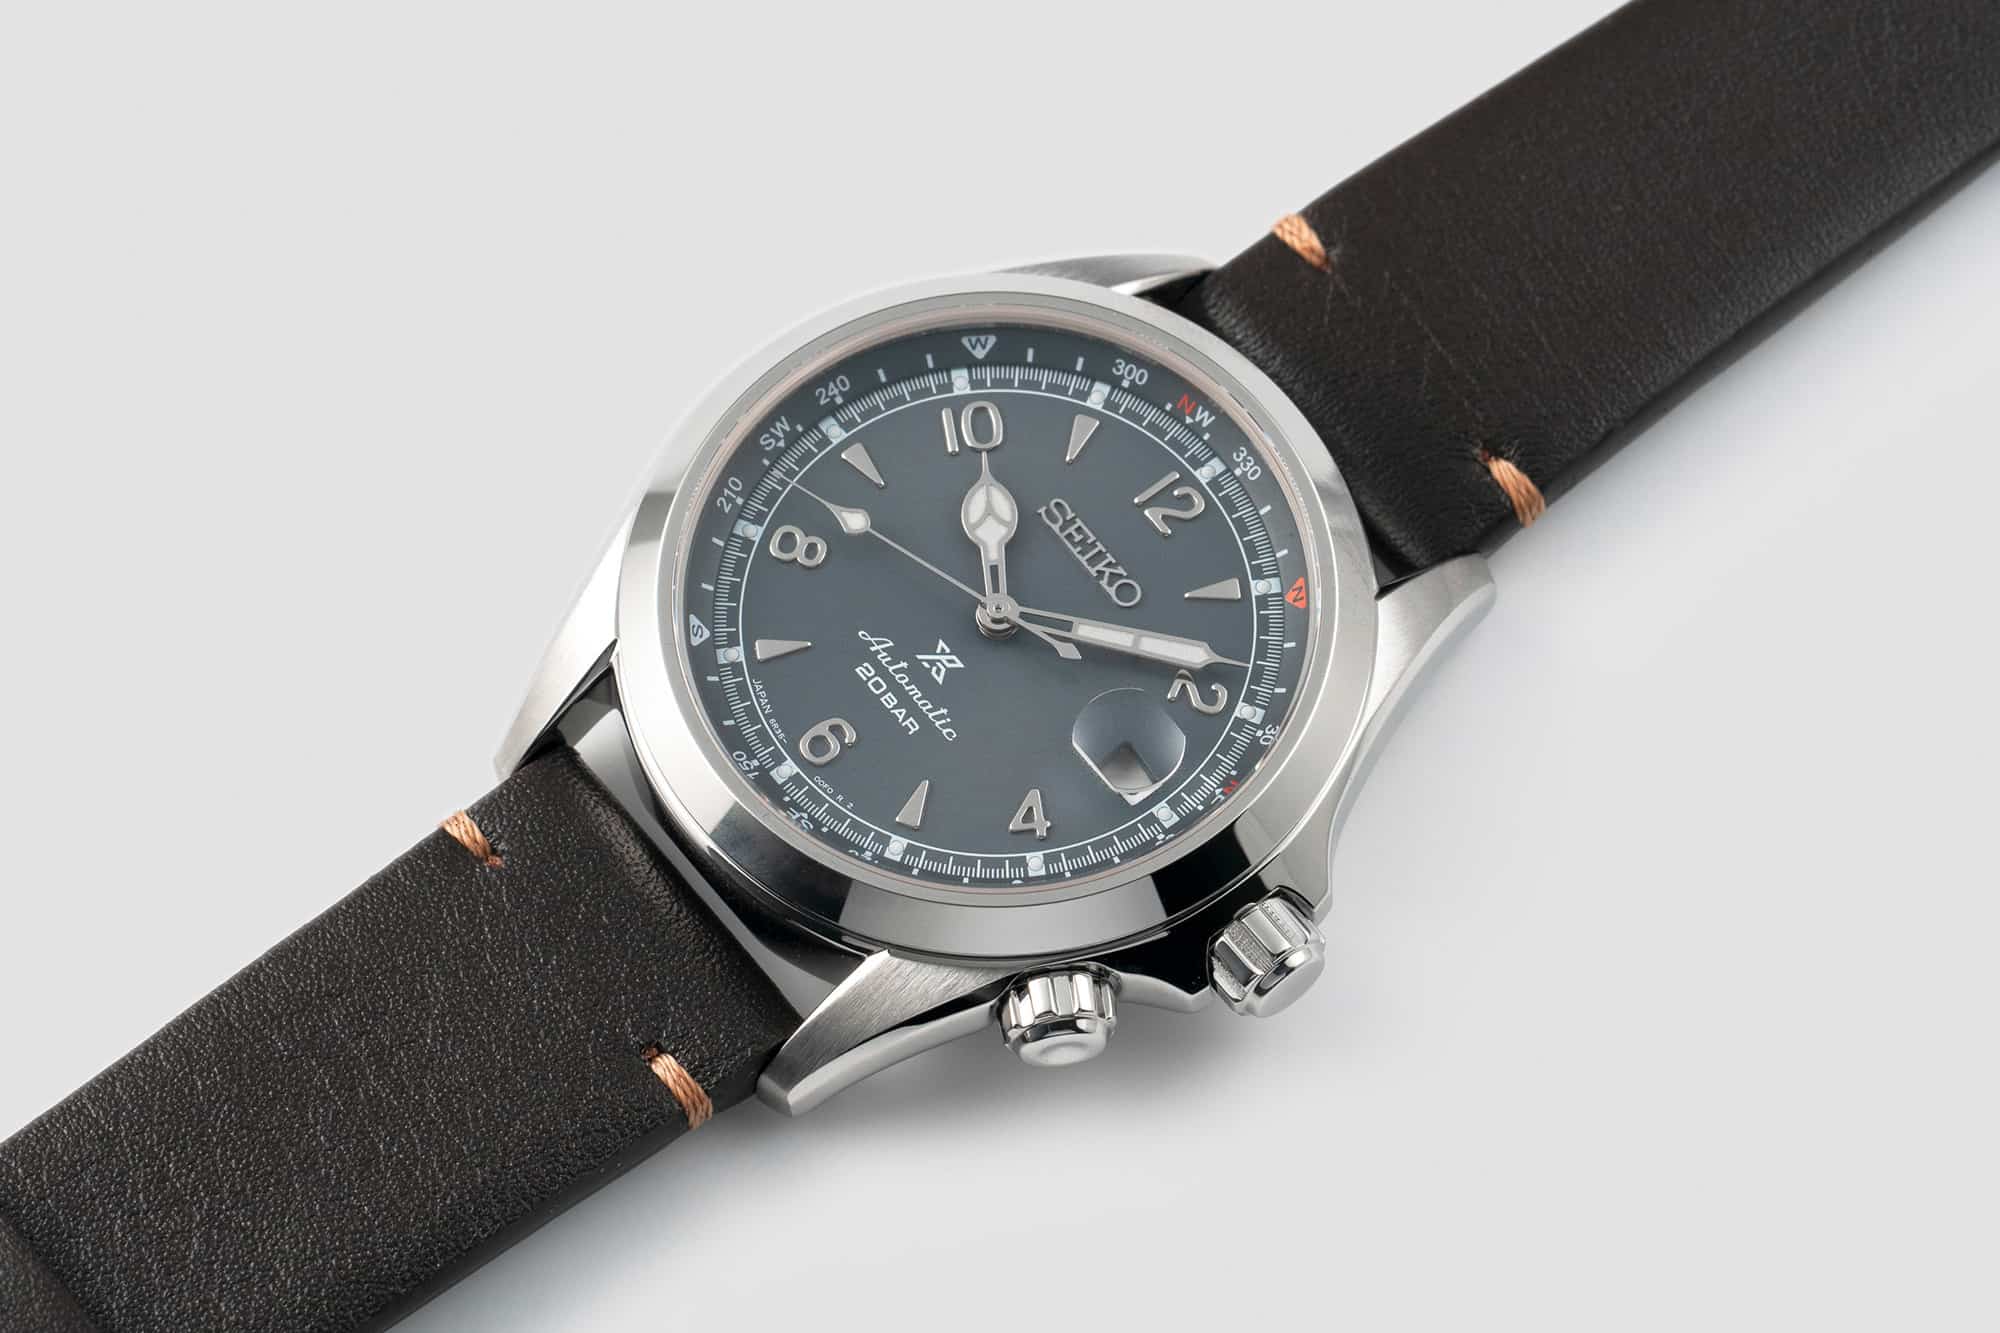 Introducing the Seiko Alpinist SPB201J1, a European Exclusive with a New Gray Dial